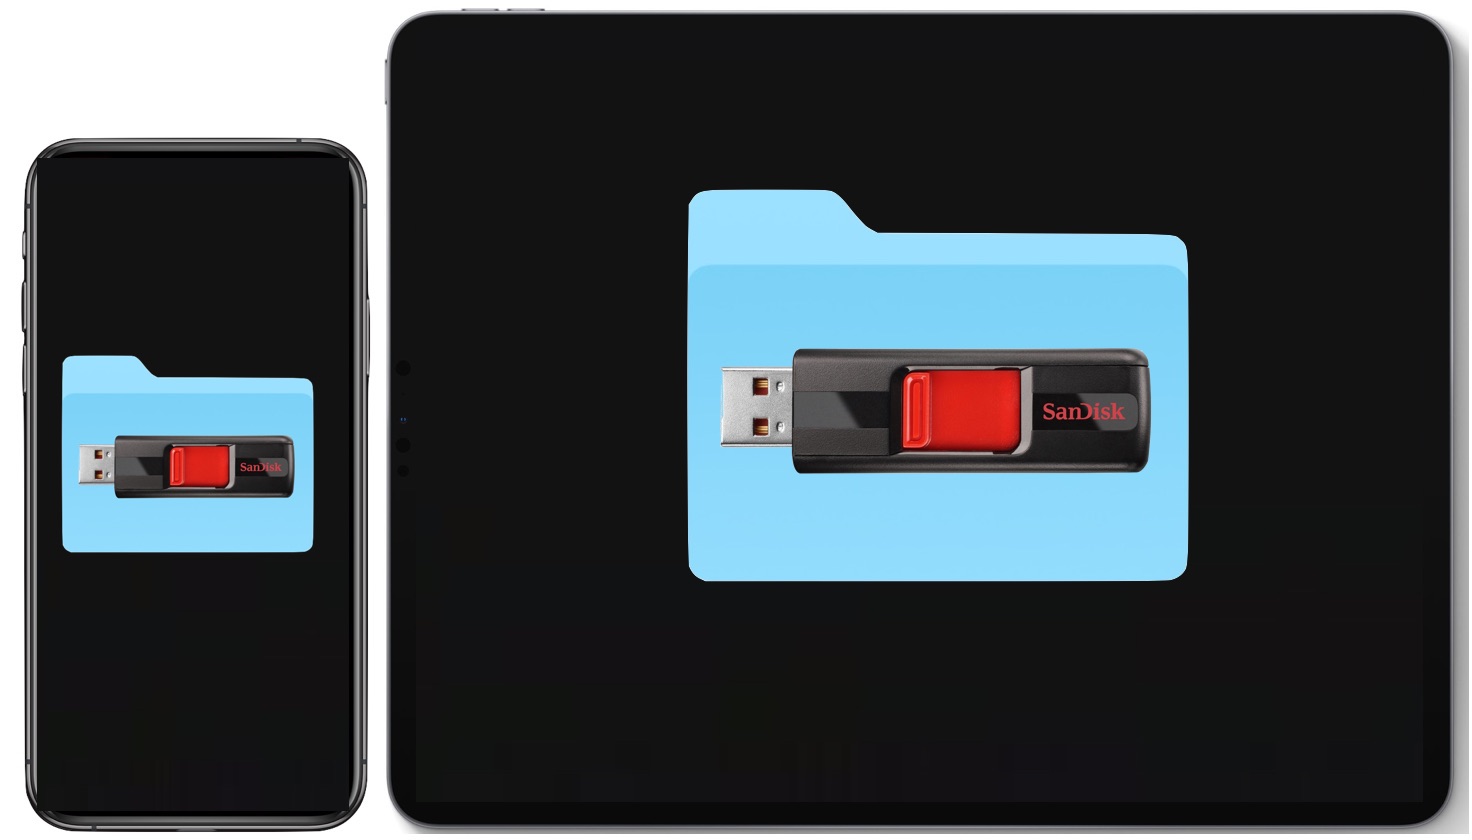 How to Connect External Storage Drive to iPad & iPhone